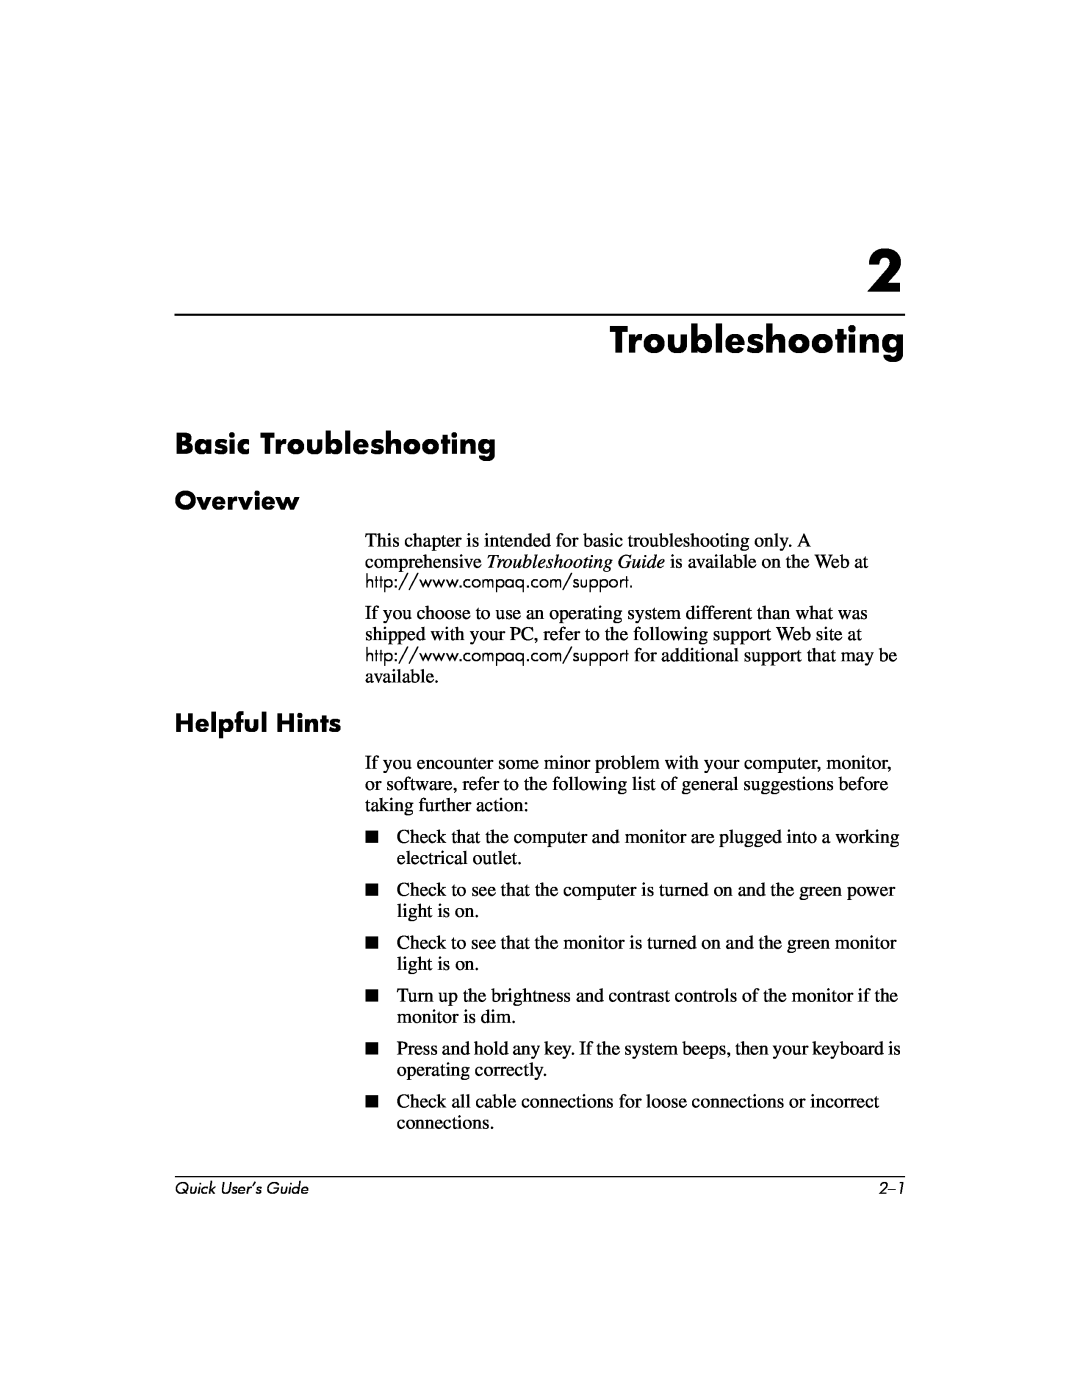 Compaq D510 e-pc manual Basic Troubleshooting, Overview, Helpful Hints 